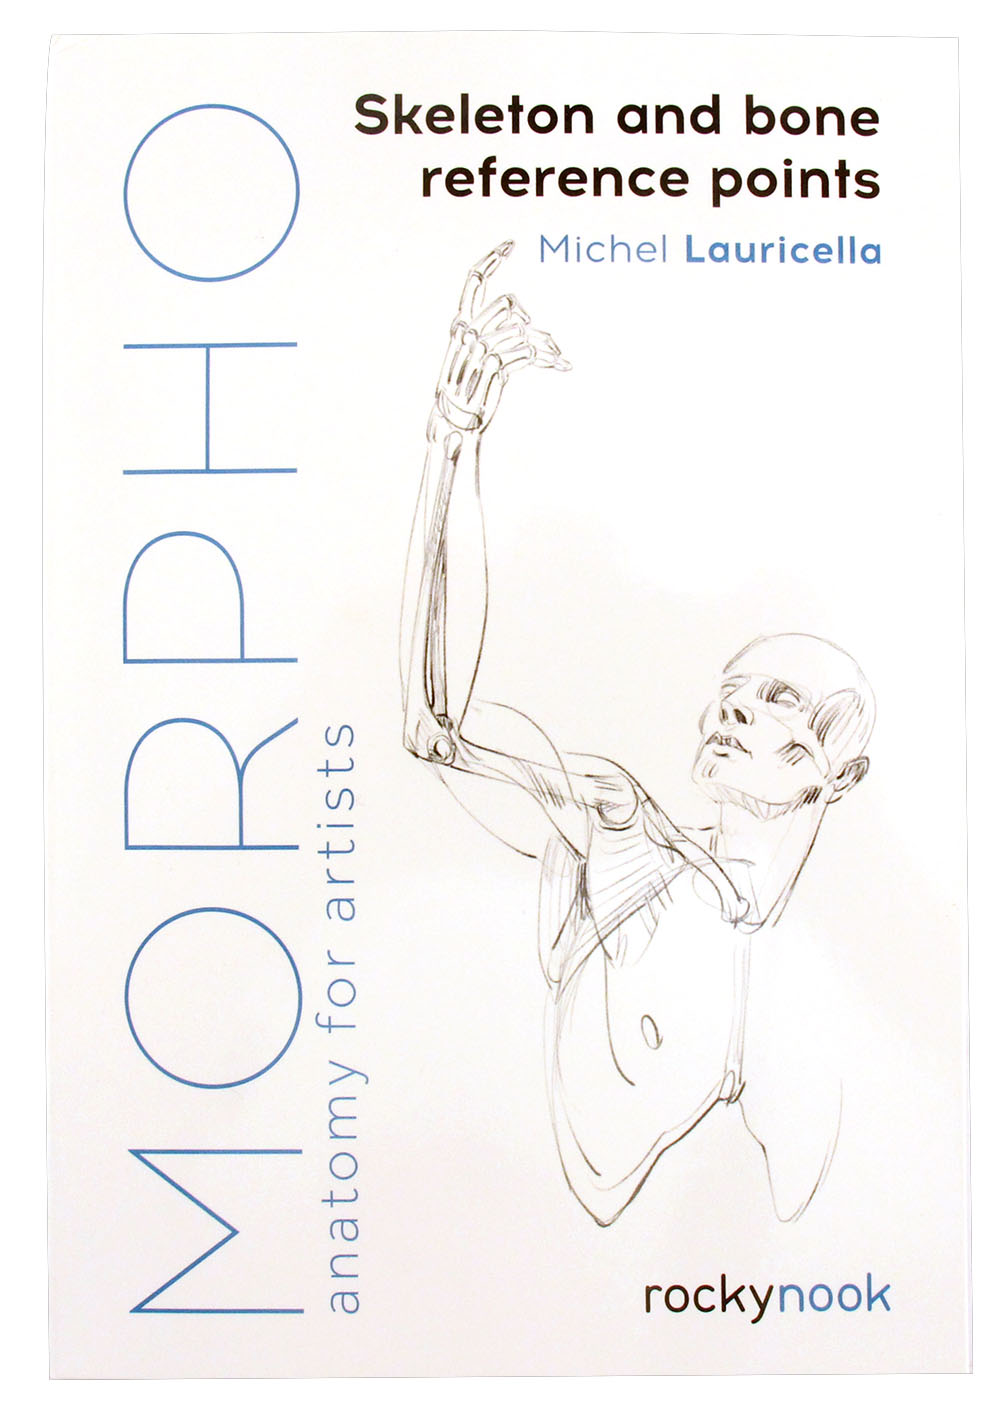 Morpho: Skeleton and bone reference points, Michel Lauricella